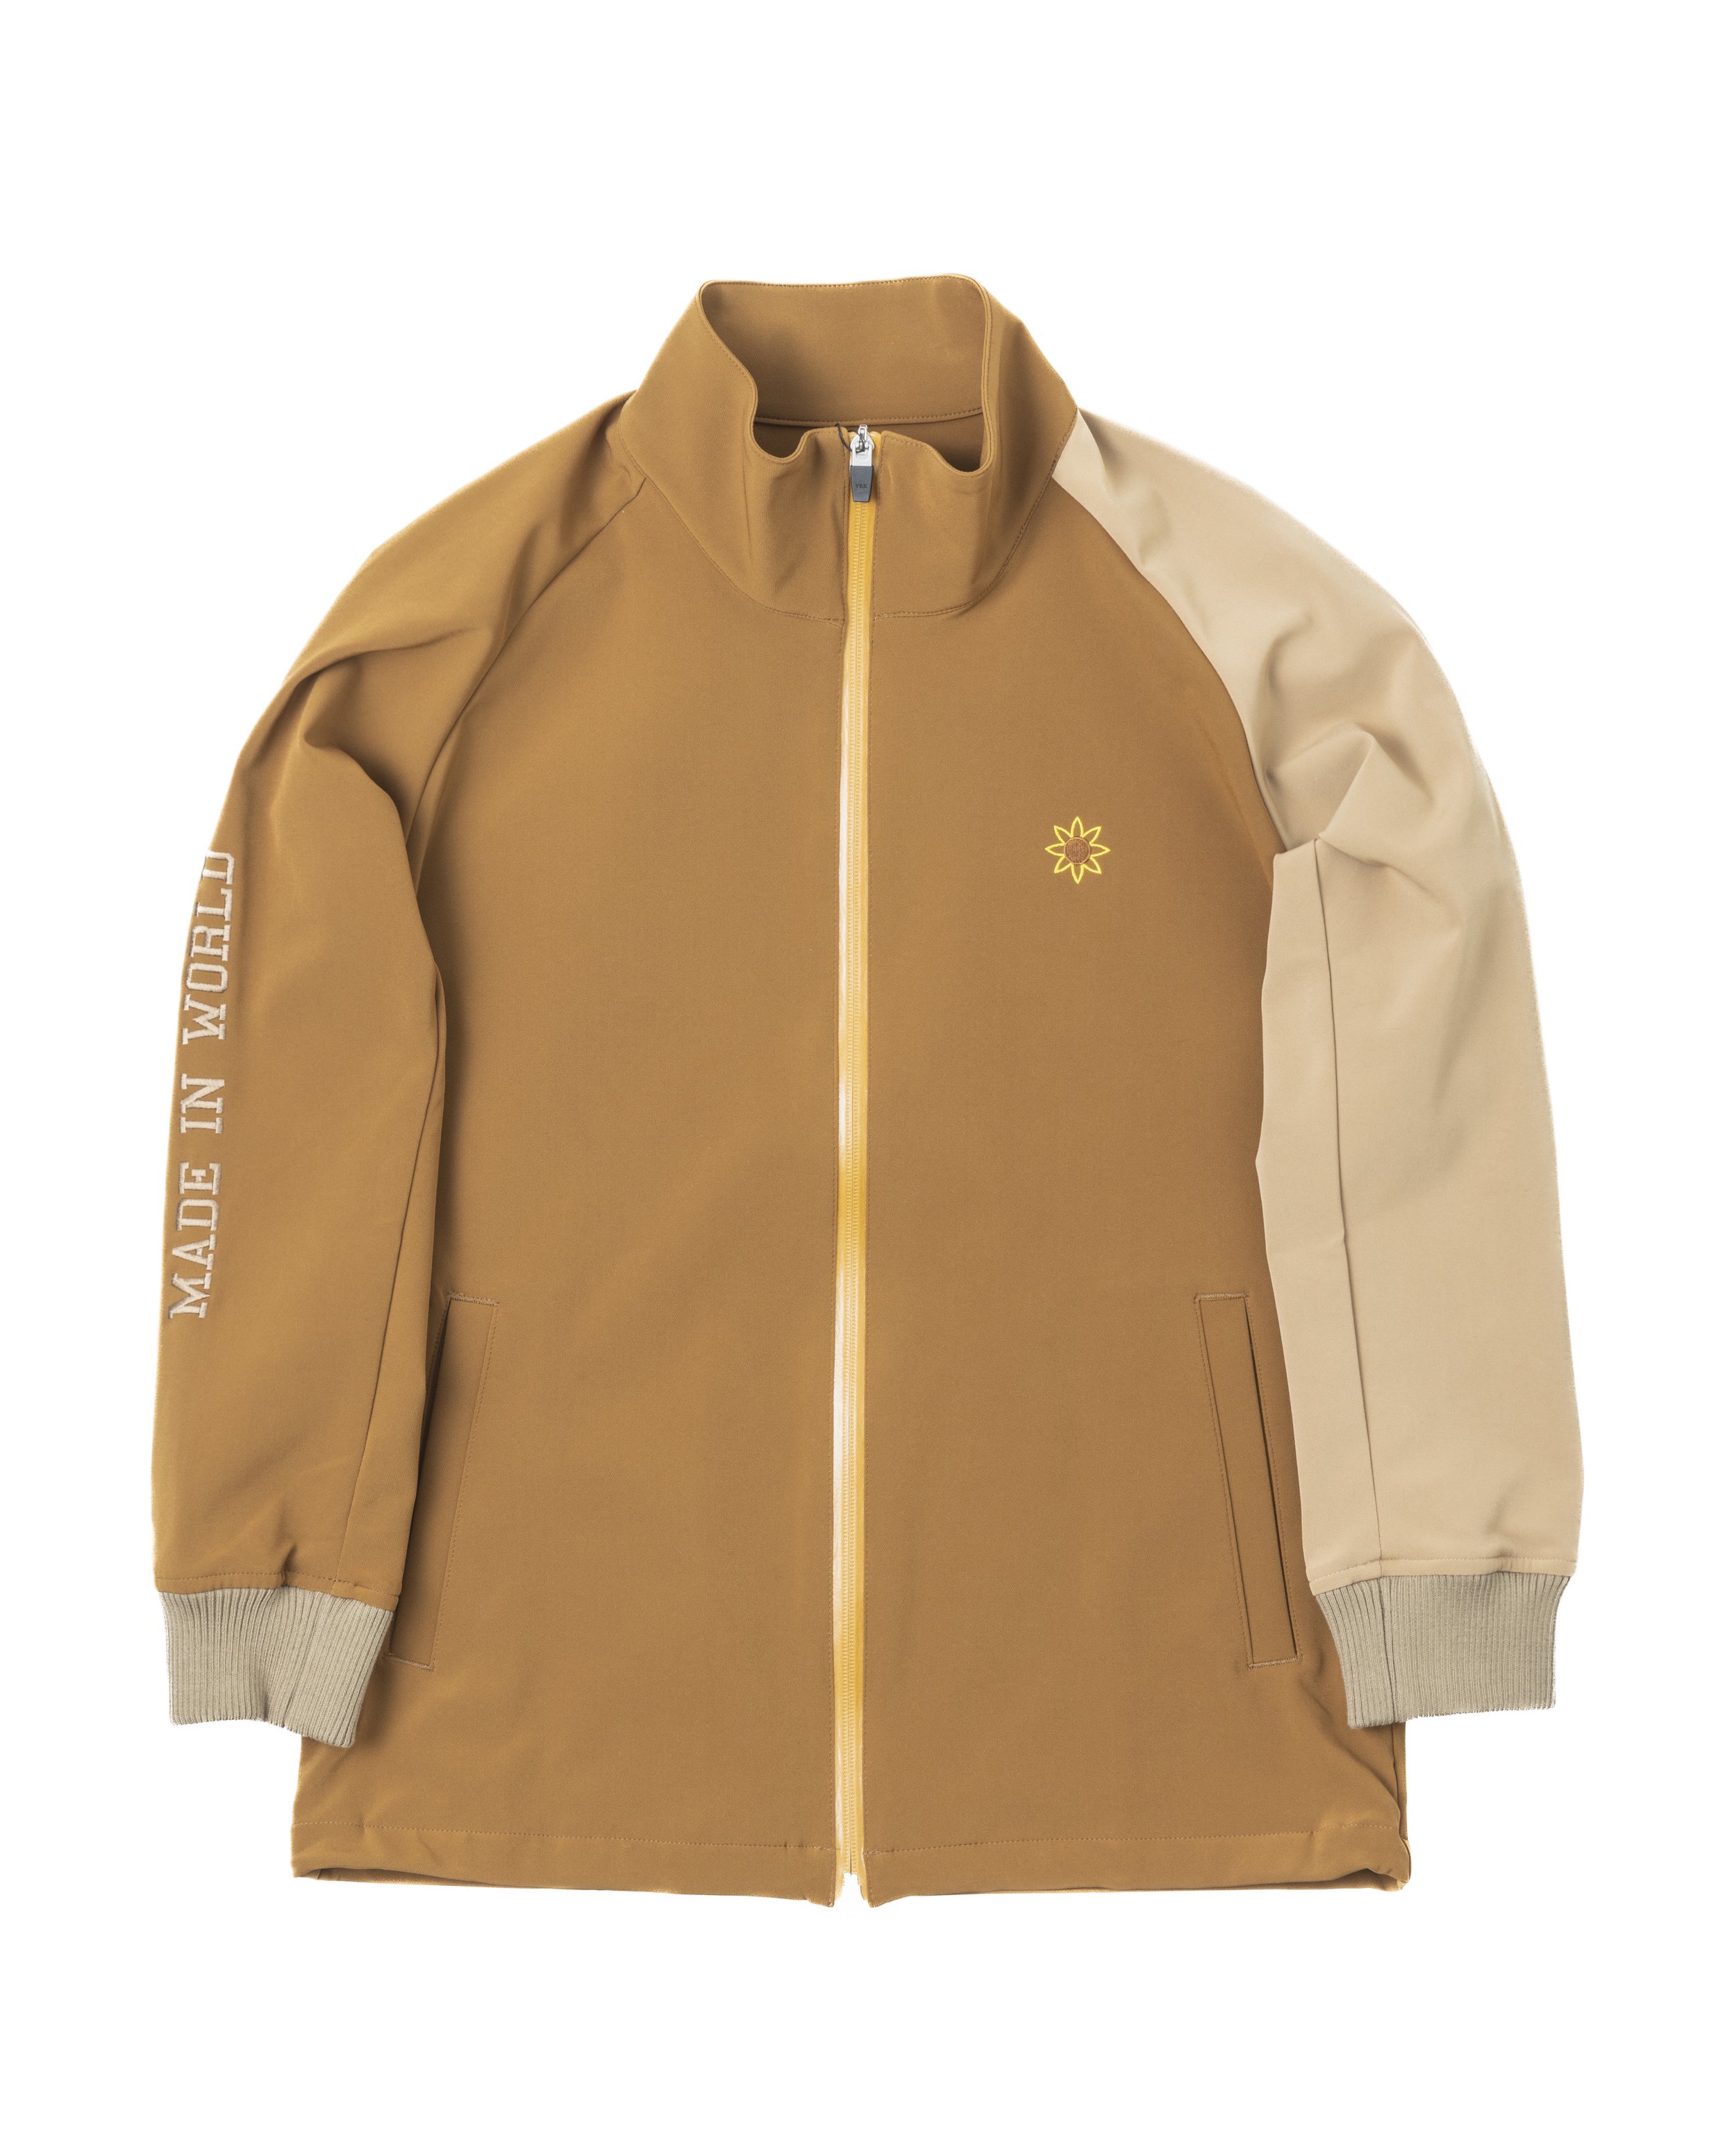 <img class='new_mark_img1' src='https://img.shop-pro.jp/img/new/icons14.gif' style='border:none;display:inline;margin:0px;padding:0px;width:auto;' />TRACK JACKET<br />camel